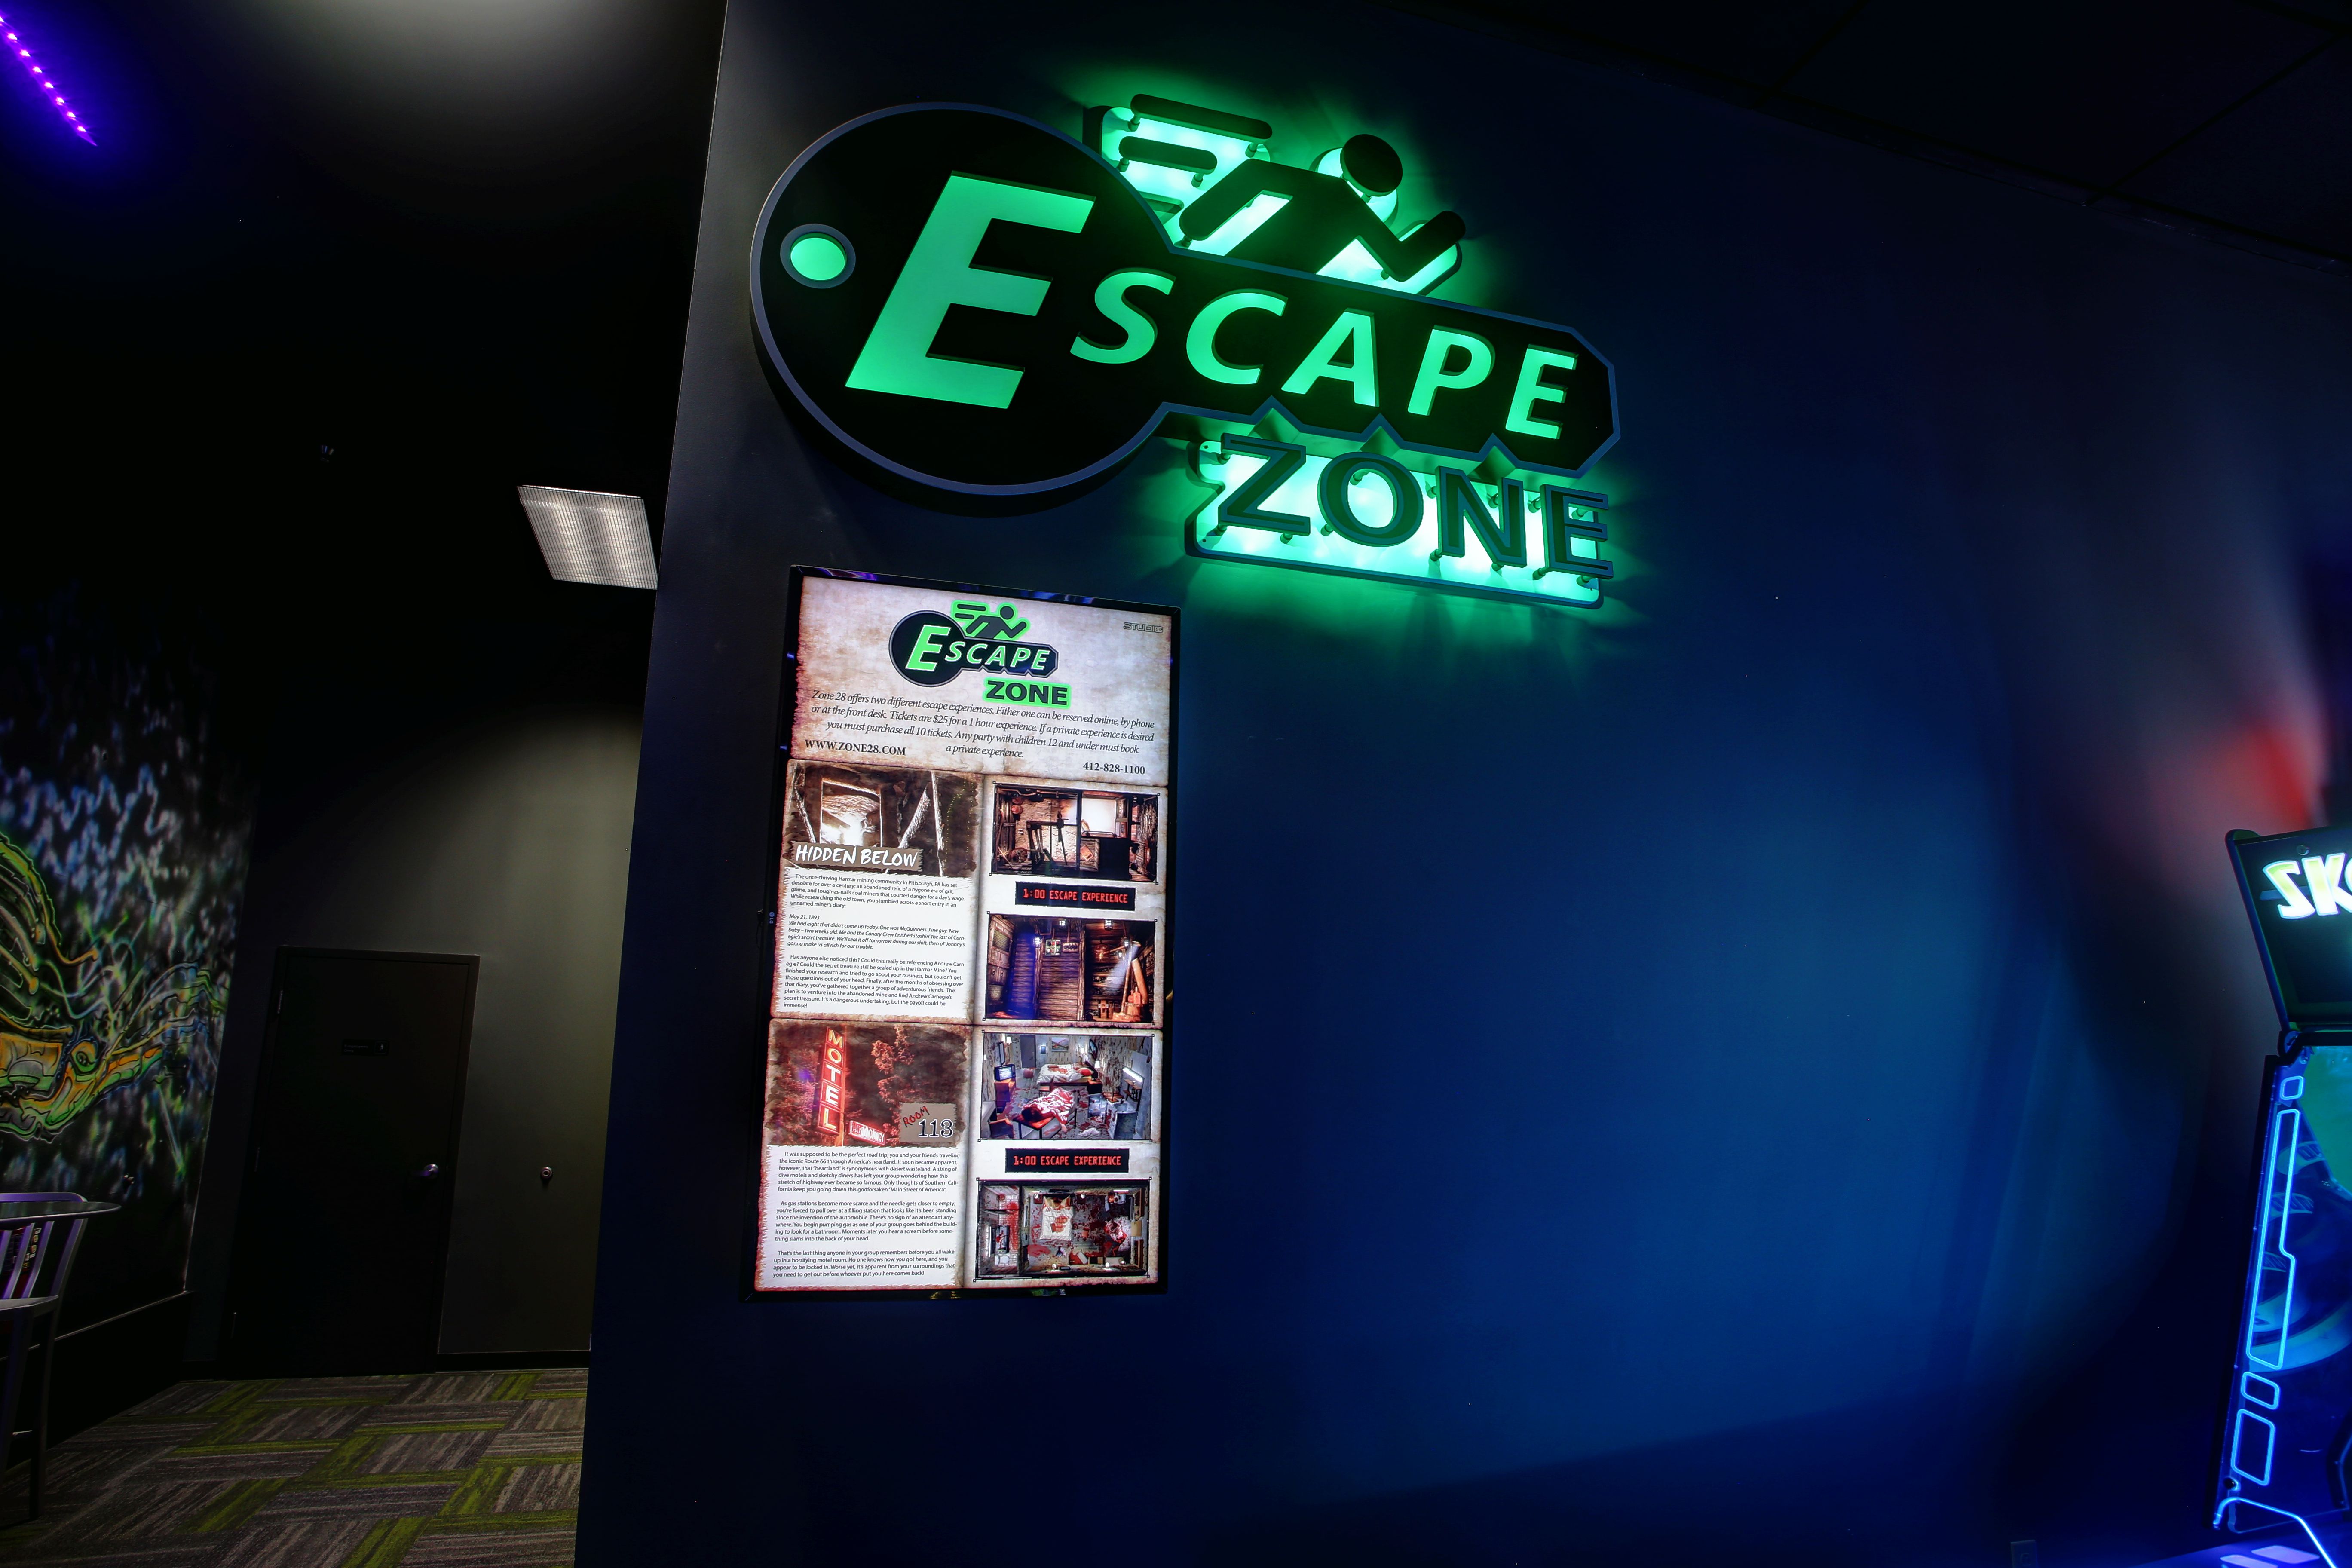 Can you make it out of the Escape Zone? Zone 28 Pittsburgh (412)828-1100